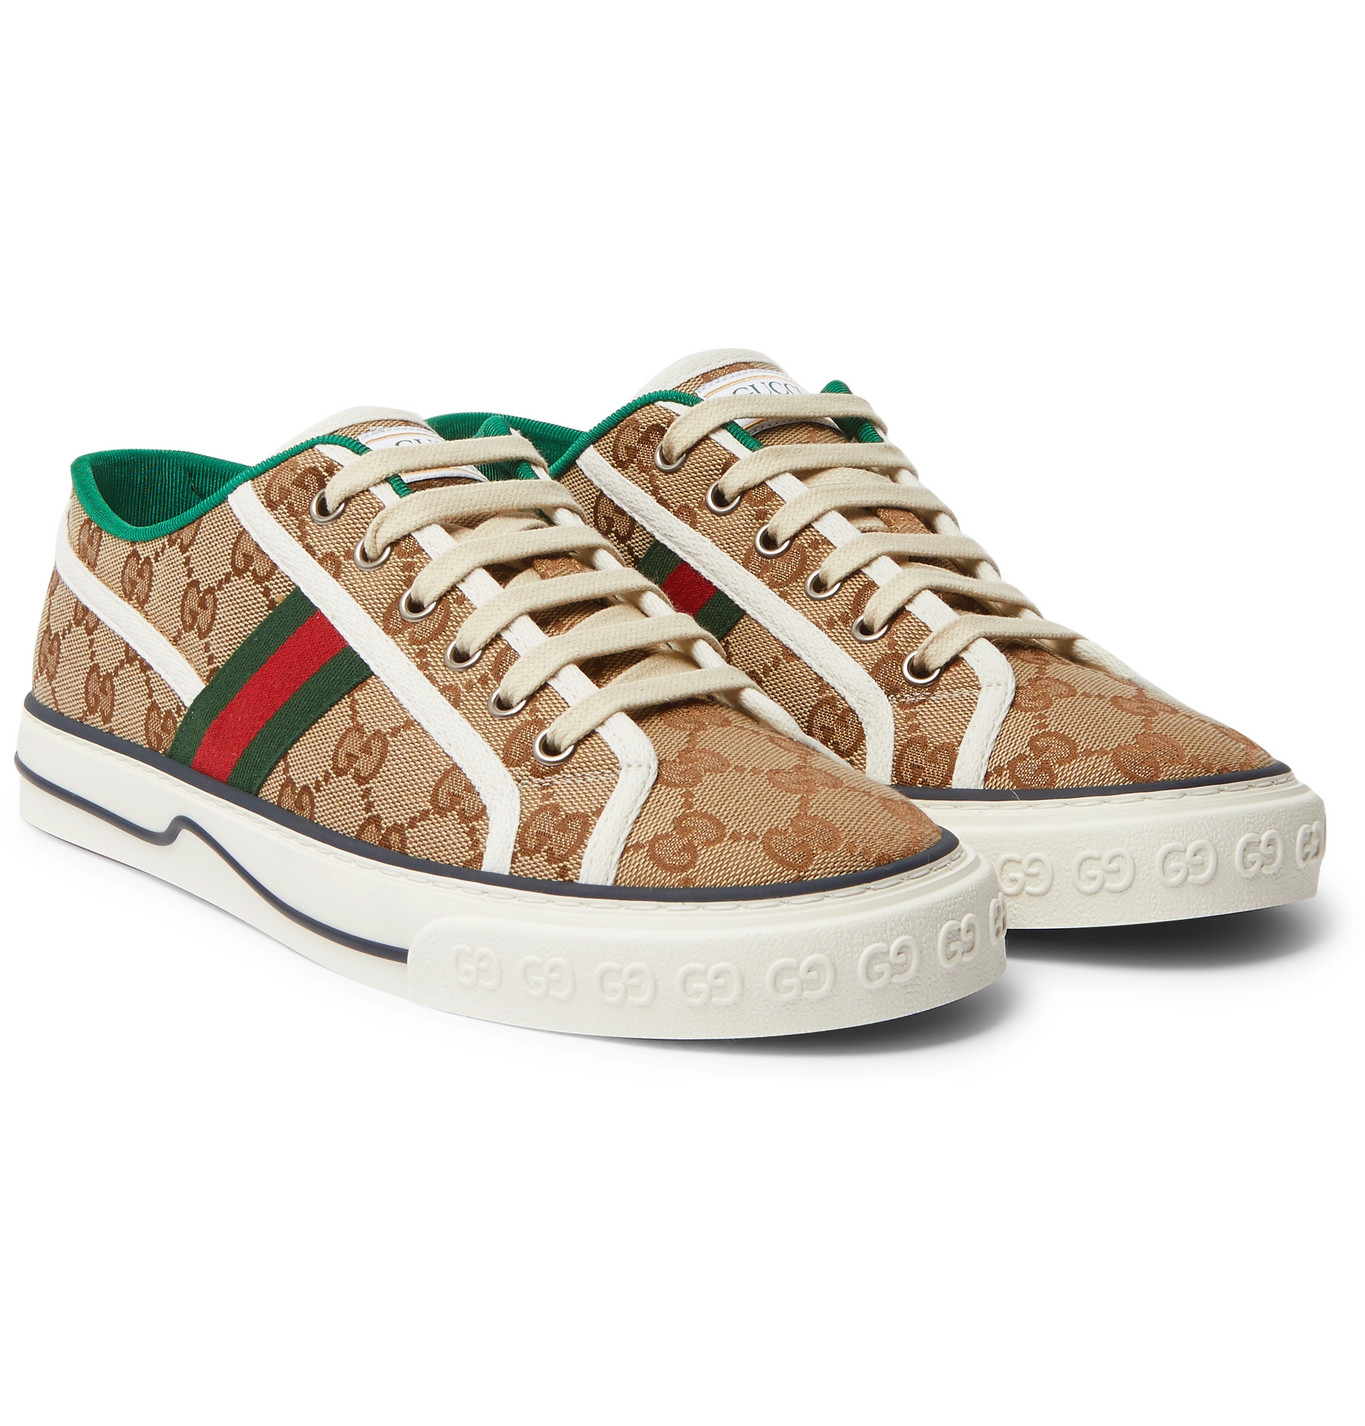 Gucci - Mignon Webbing-Trimmed Jacquard Sneakers - Men - Brown | The ...